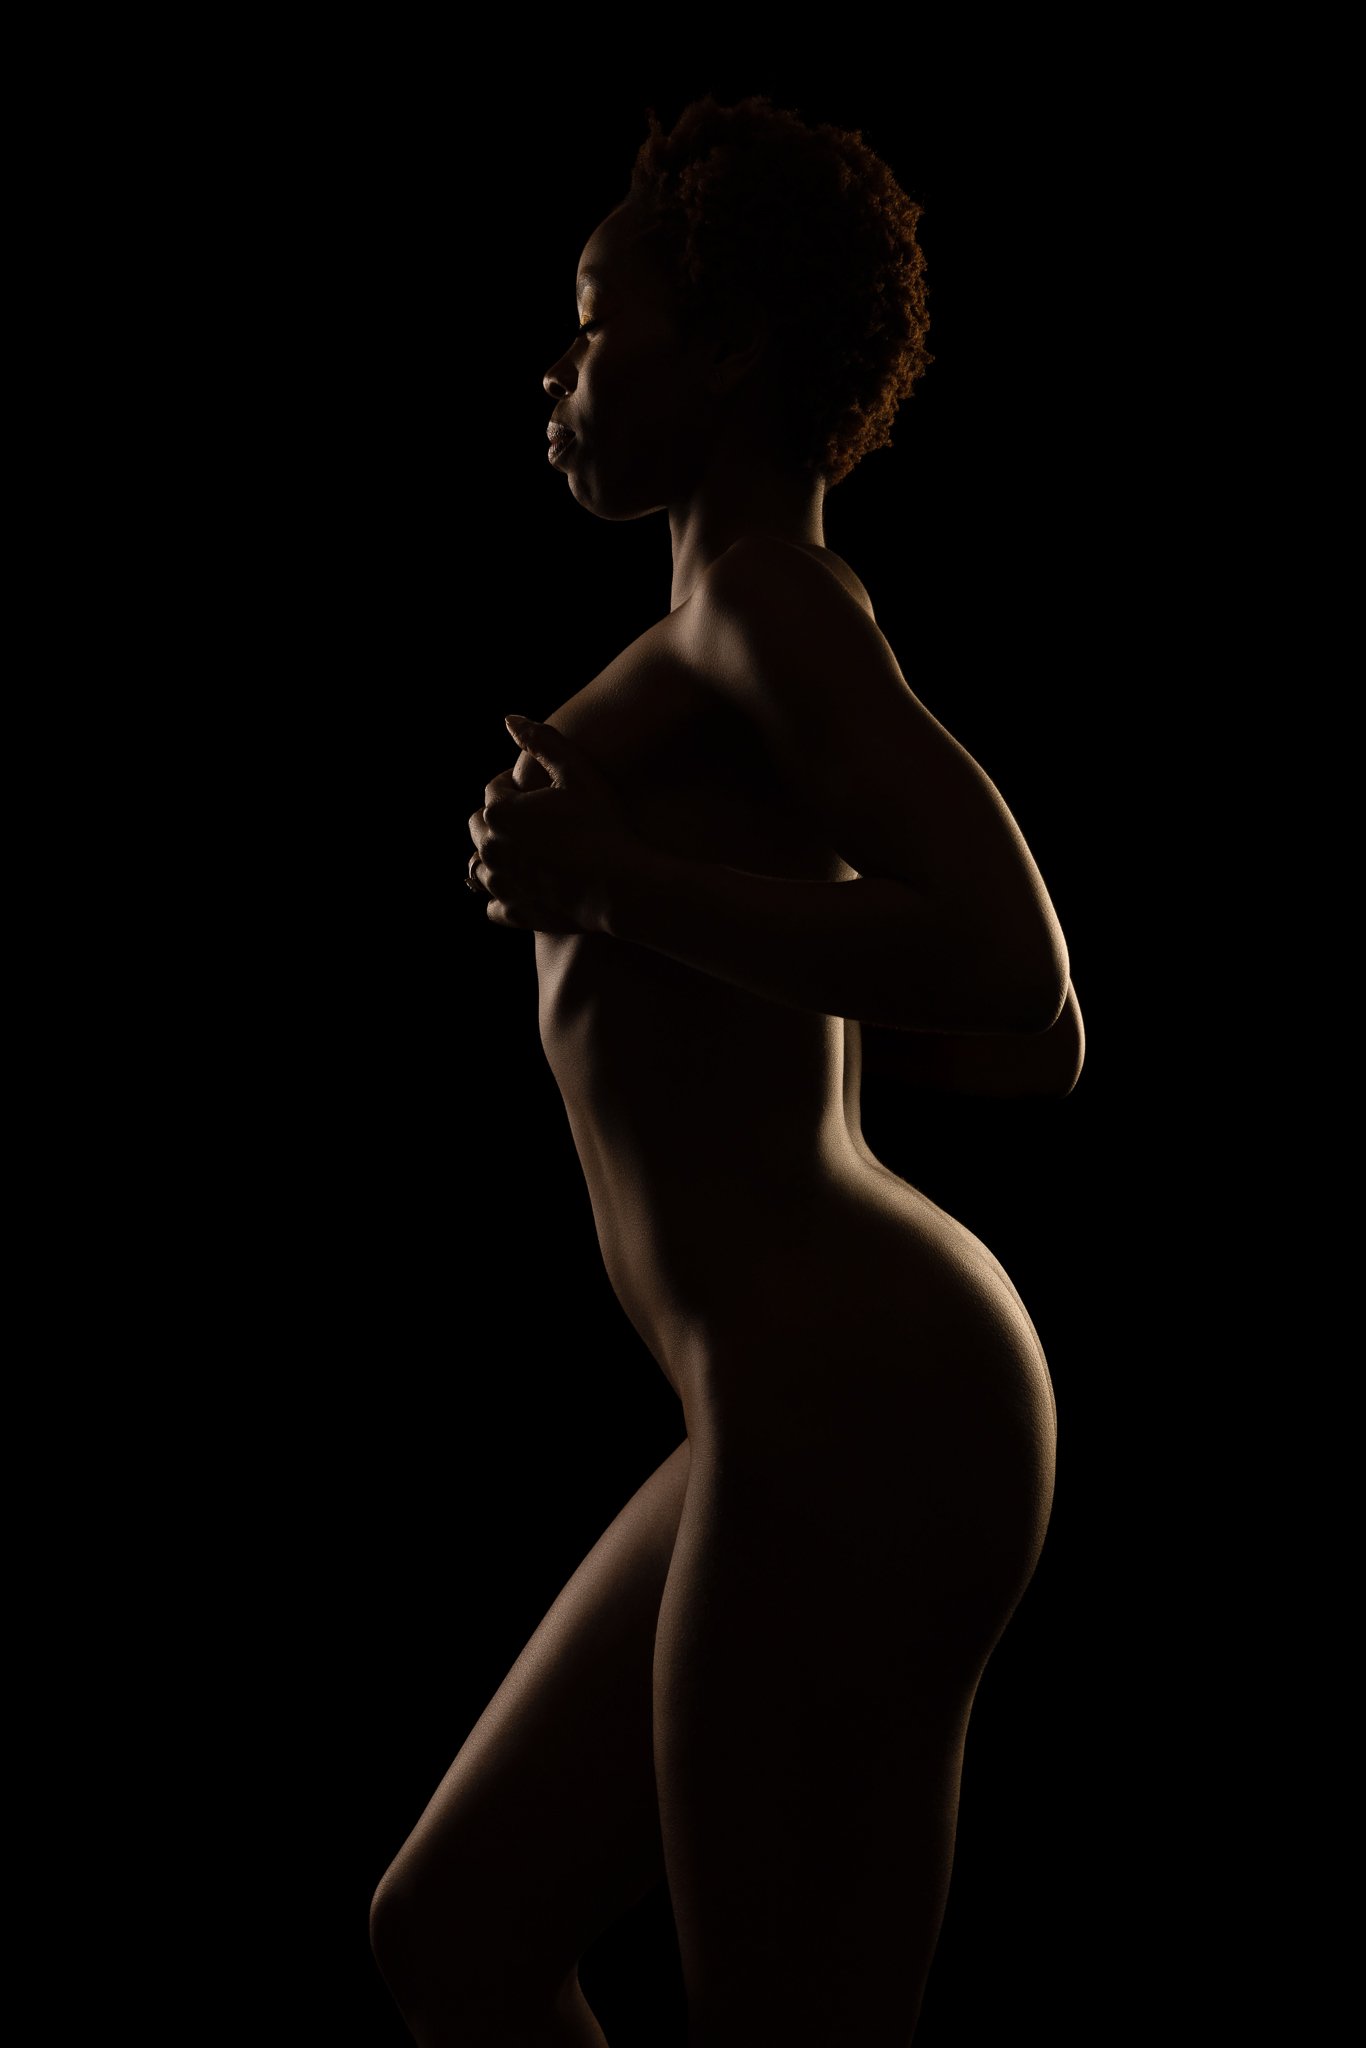 Nude silhouette of an athletic black woman